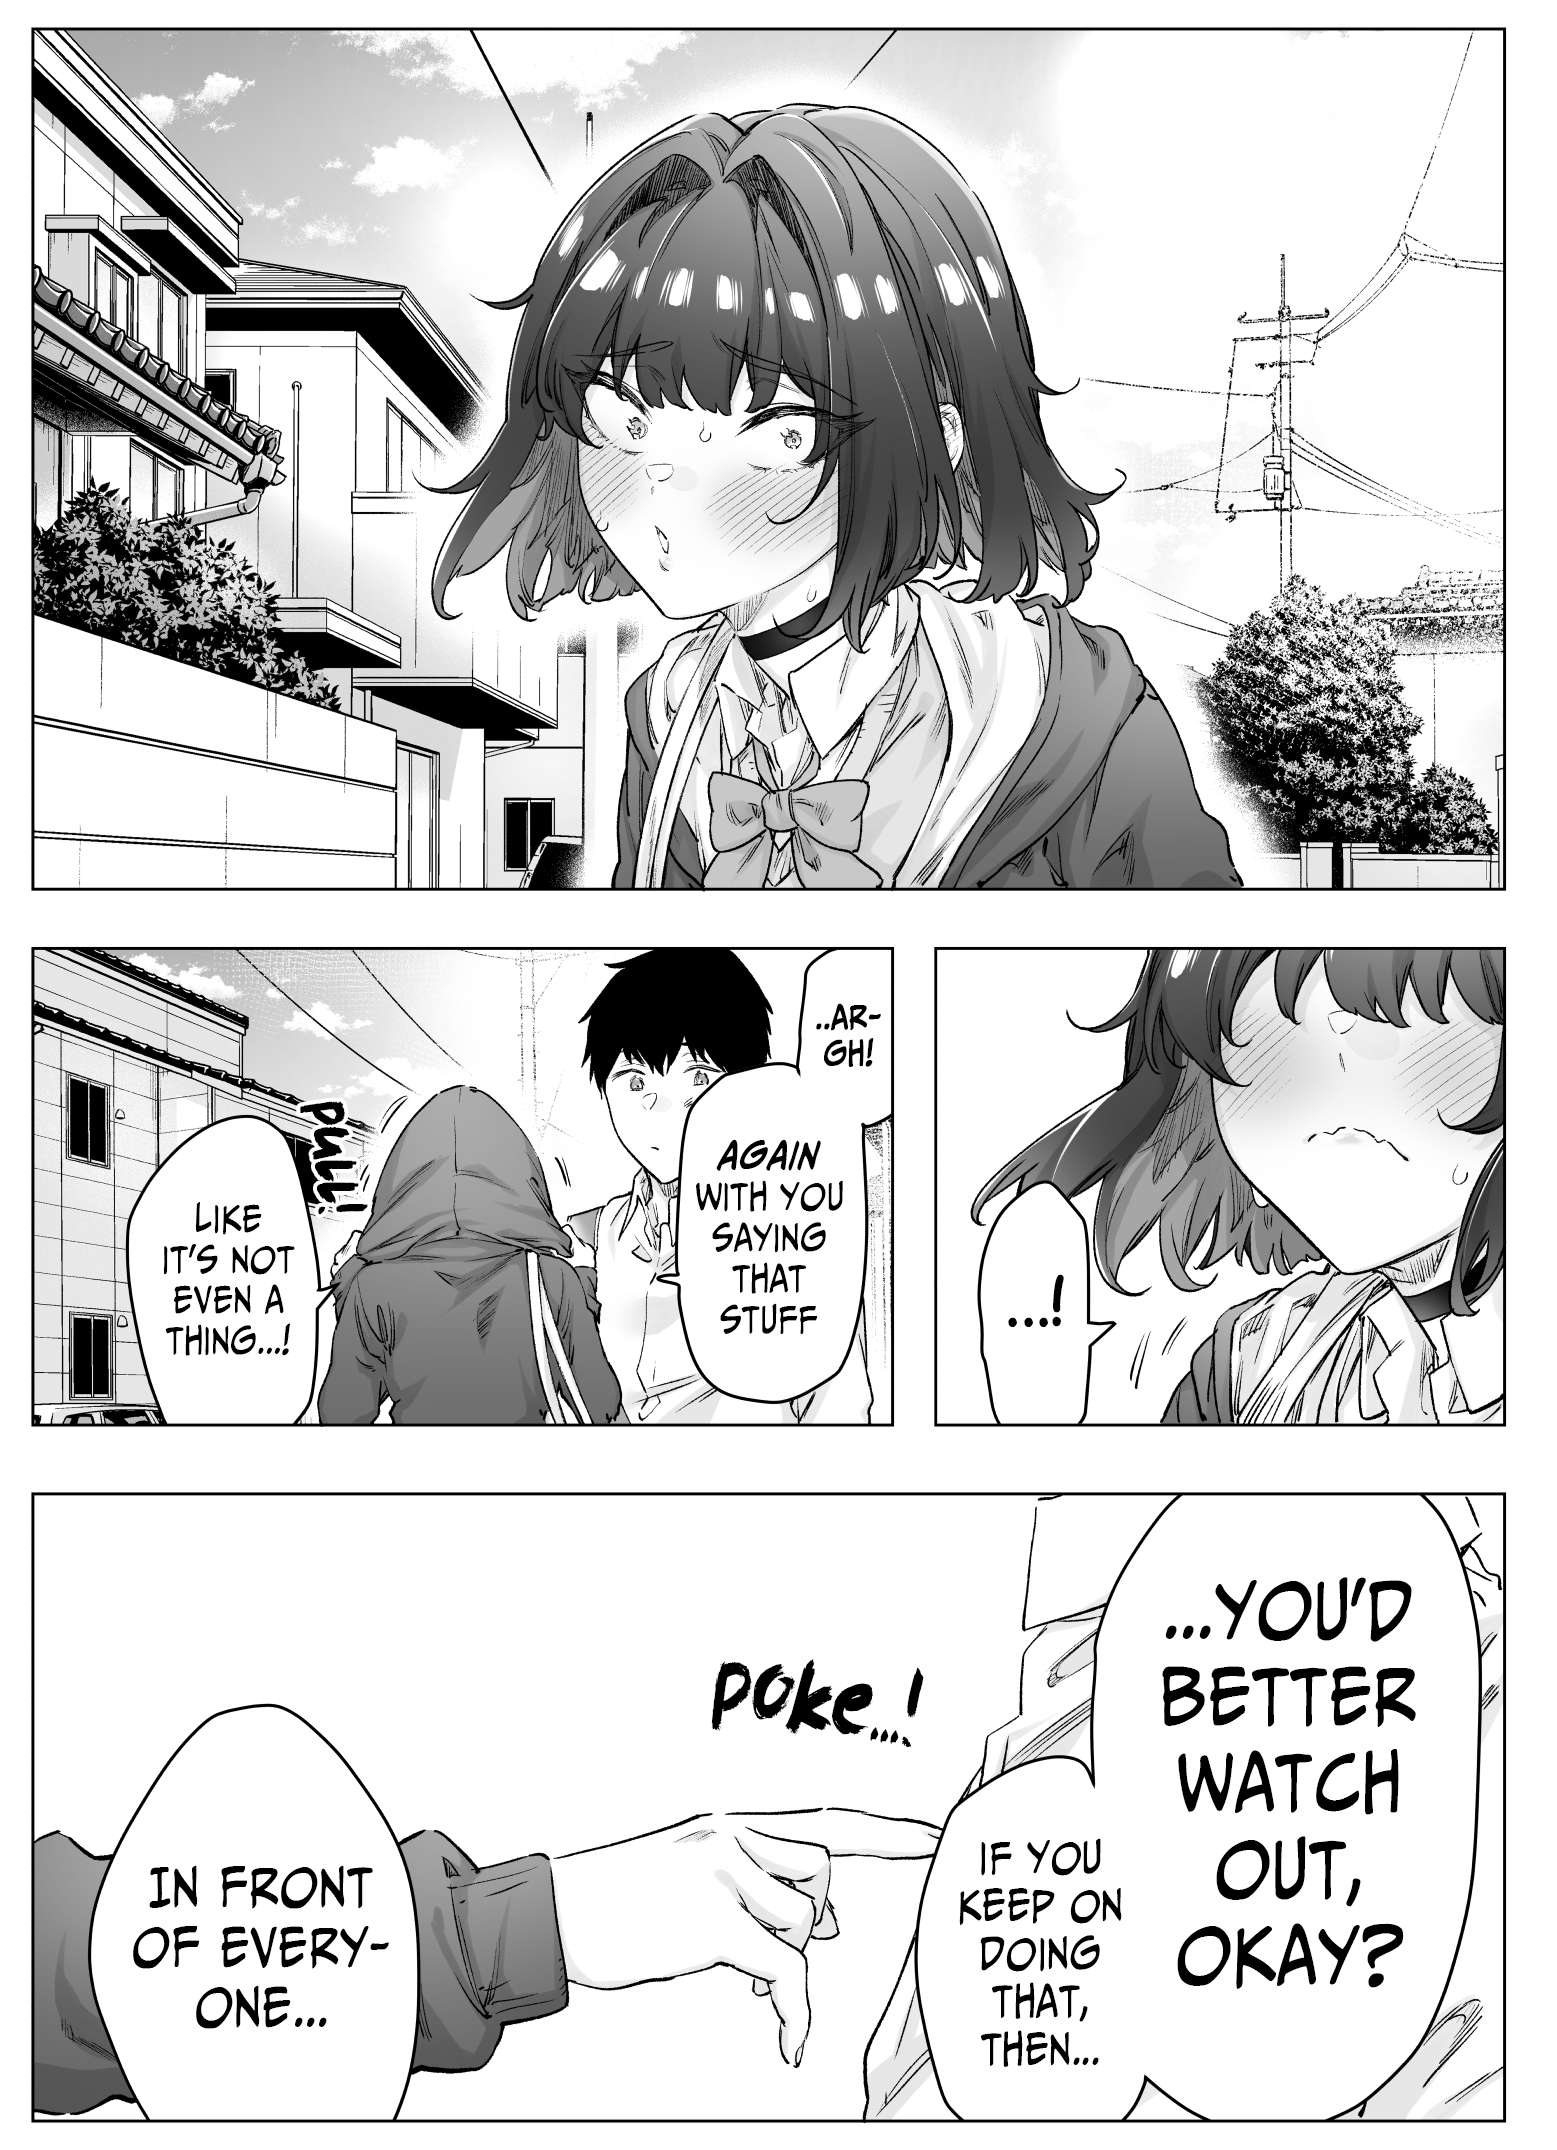 The Tsuntsuntsuntsuntsuntsuntsuntsuntsuntsuntsundere Girl Getting Less and Less Tsun Day by Day - chapter 101 - #2